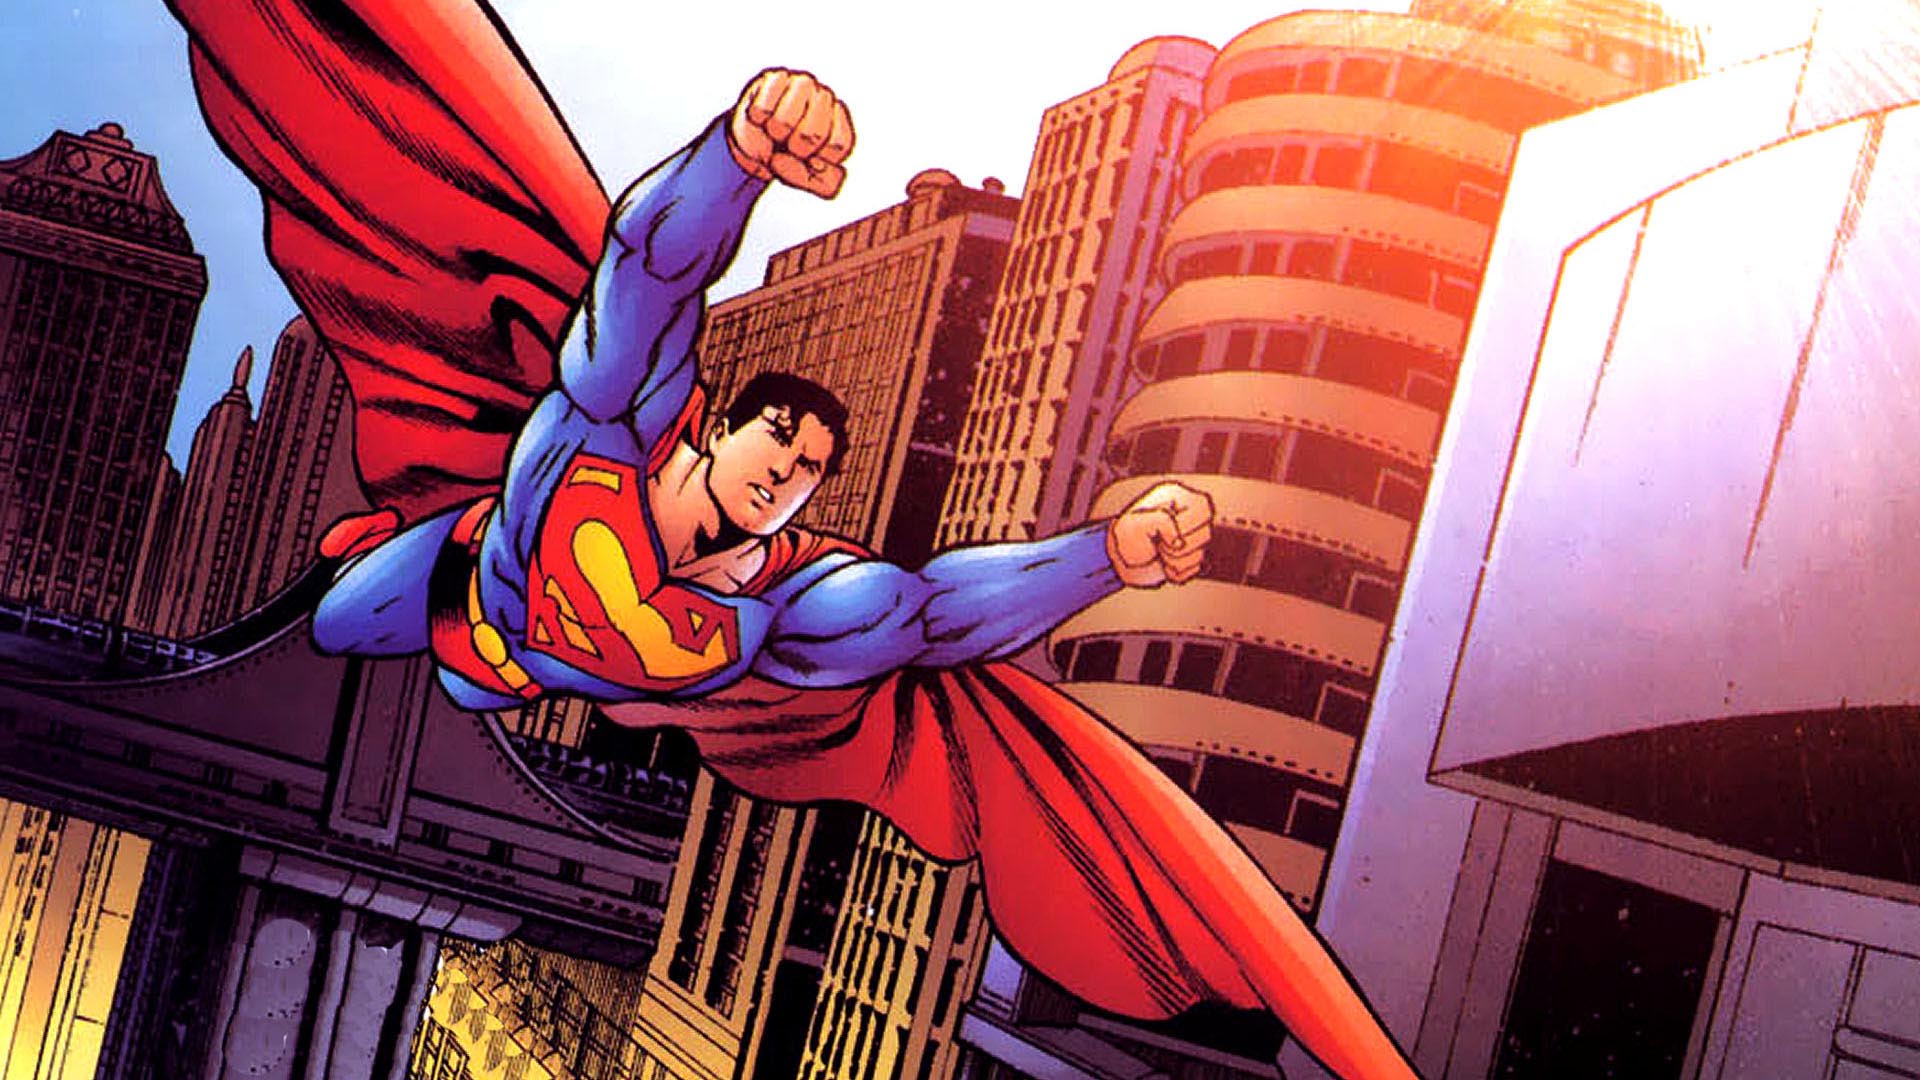 National Superman Day